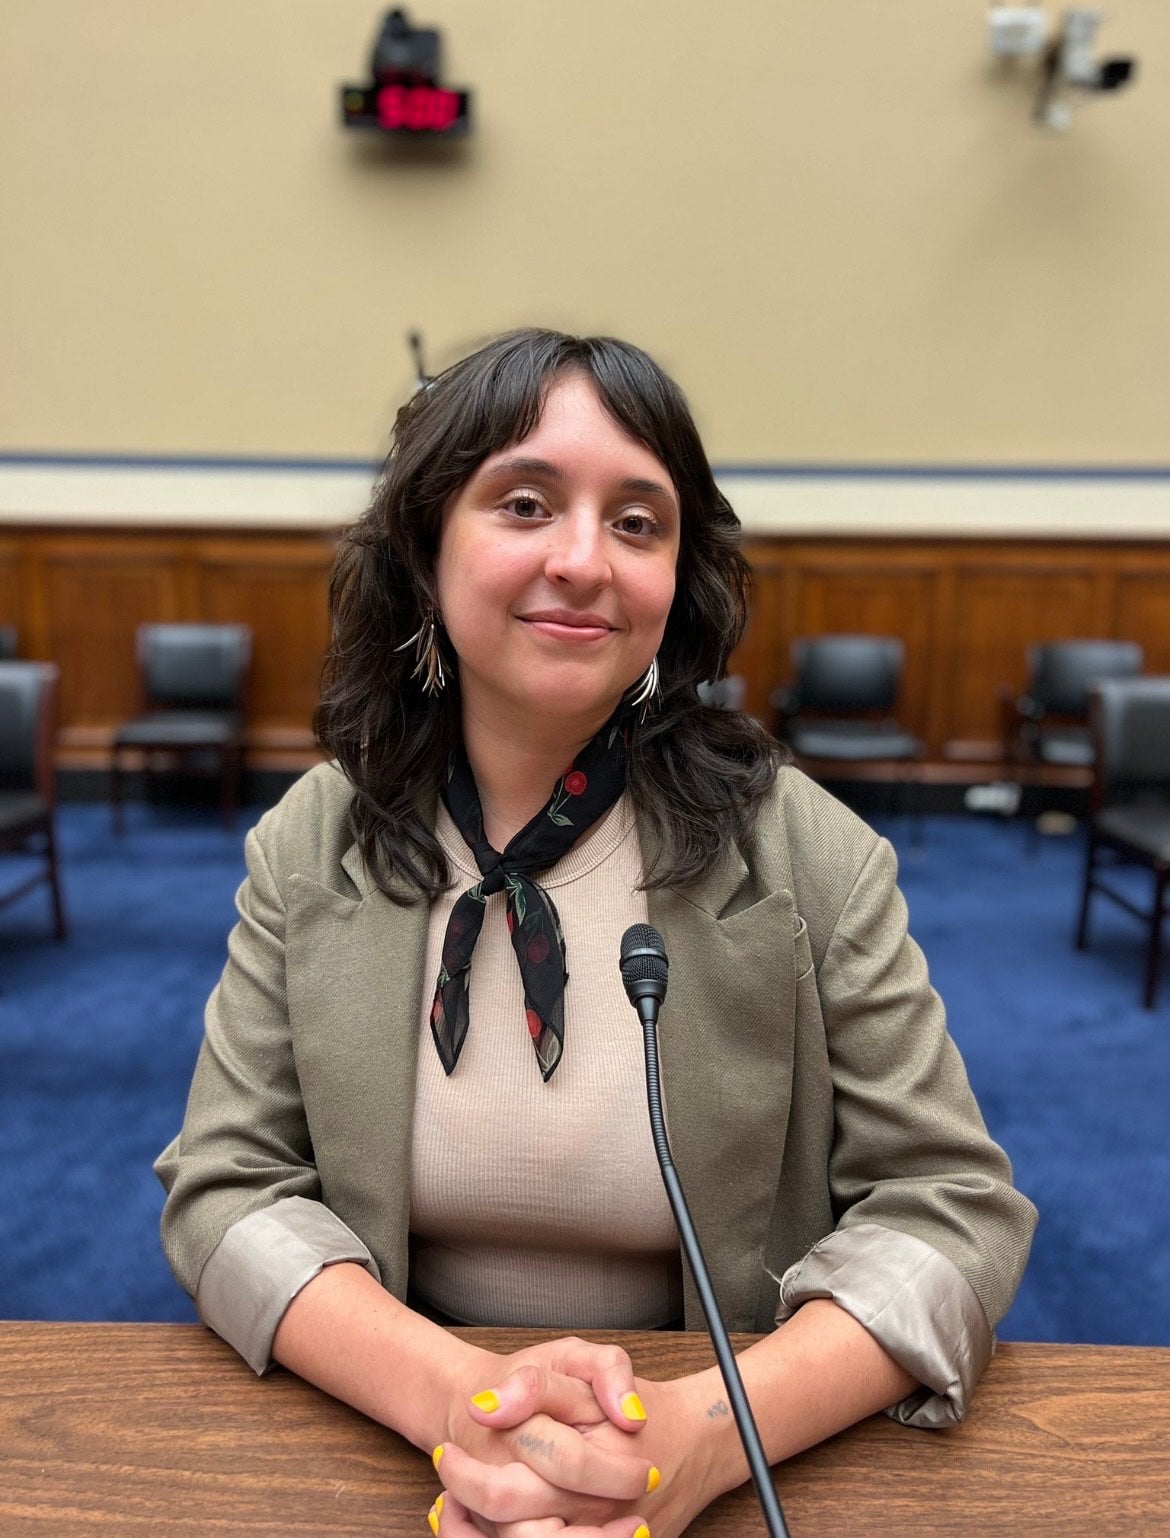 ‘Abortion storyteller’ Sarah Lopez, 29, testified before Congress earlier this month regarding her own experience of abortion and advocacy in Texas - which has outlawed almost all abortions after the Supreme Court’s overturn of Roe v Wade left abortion legislation up to the states